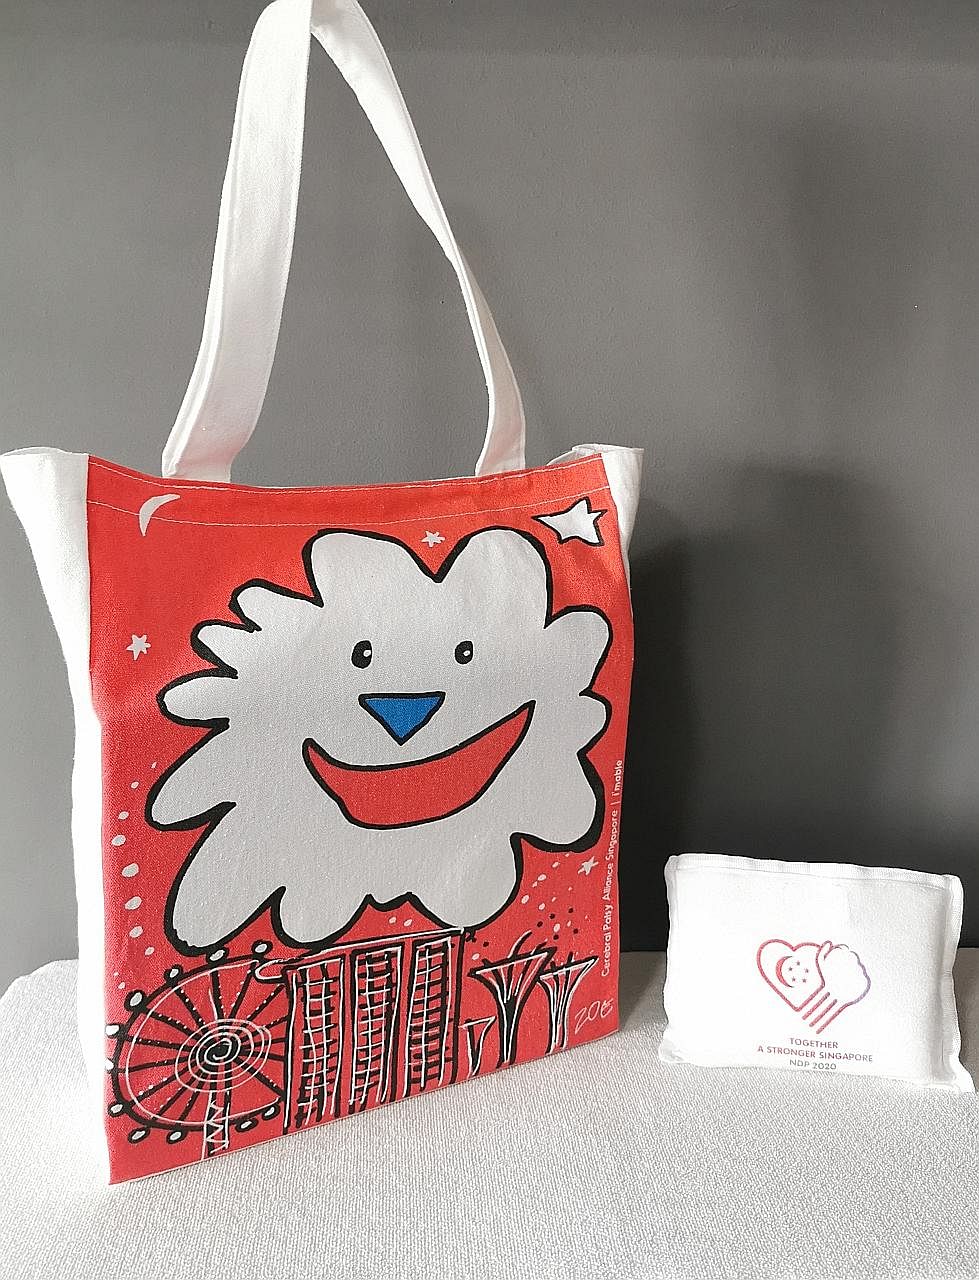 The bag for the funpack is a reusable grocery bag that is foldable (far right). It is designed by primary school pupils or artists with disabilities.